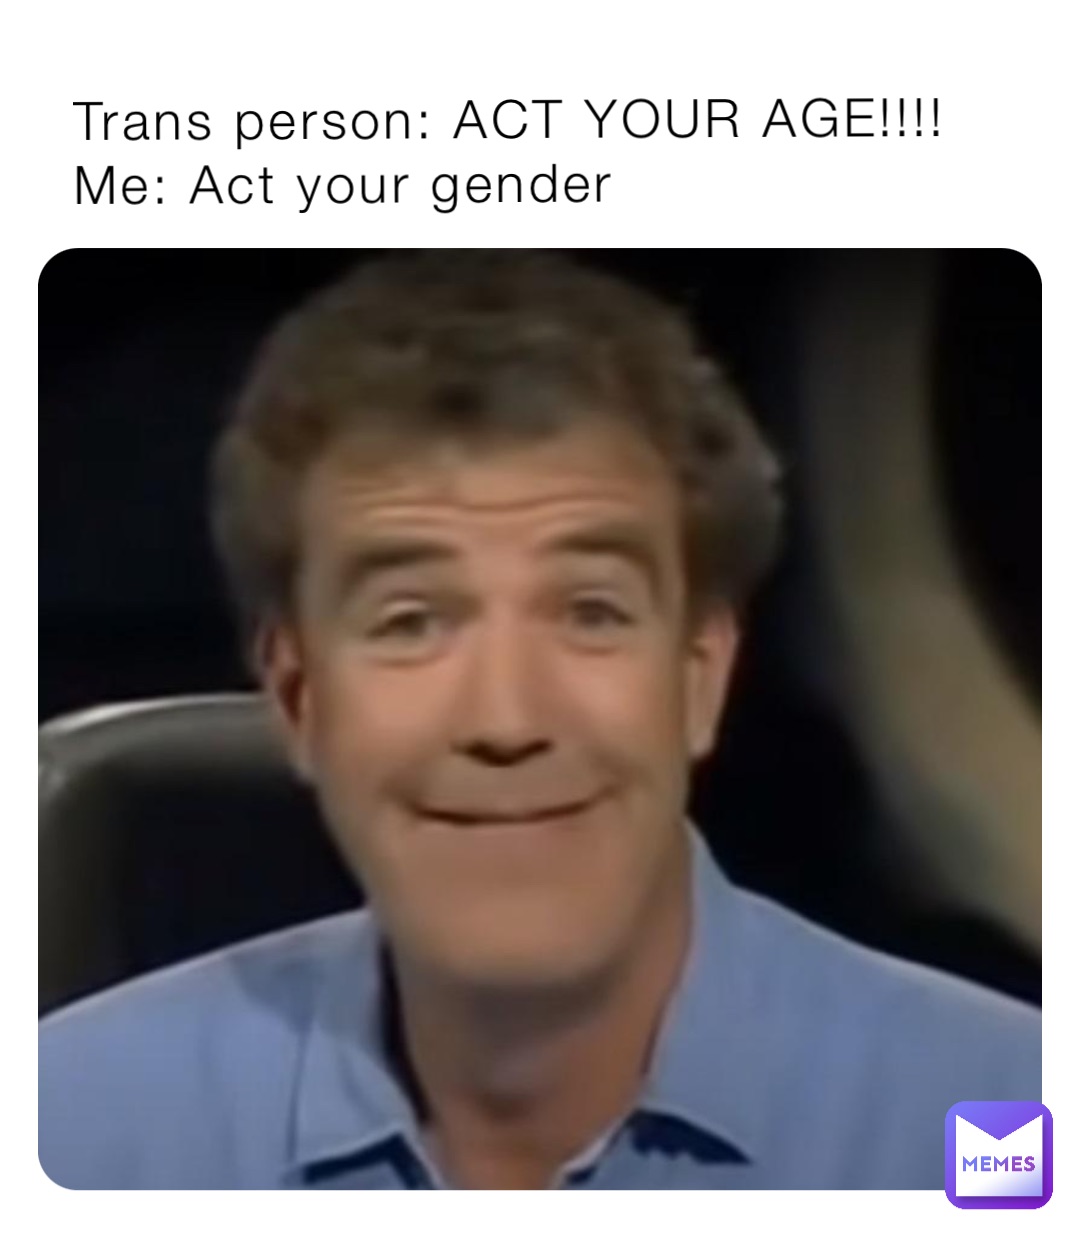 Trans person: ACT YOUR AGE!!!!
Me: Act your gender